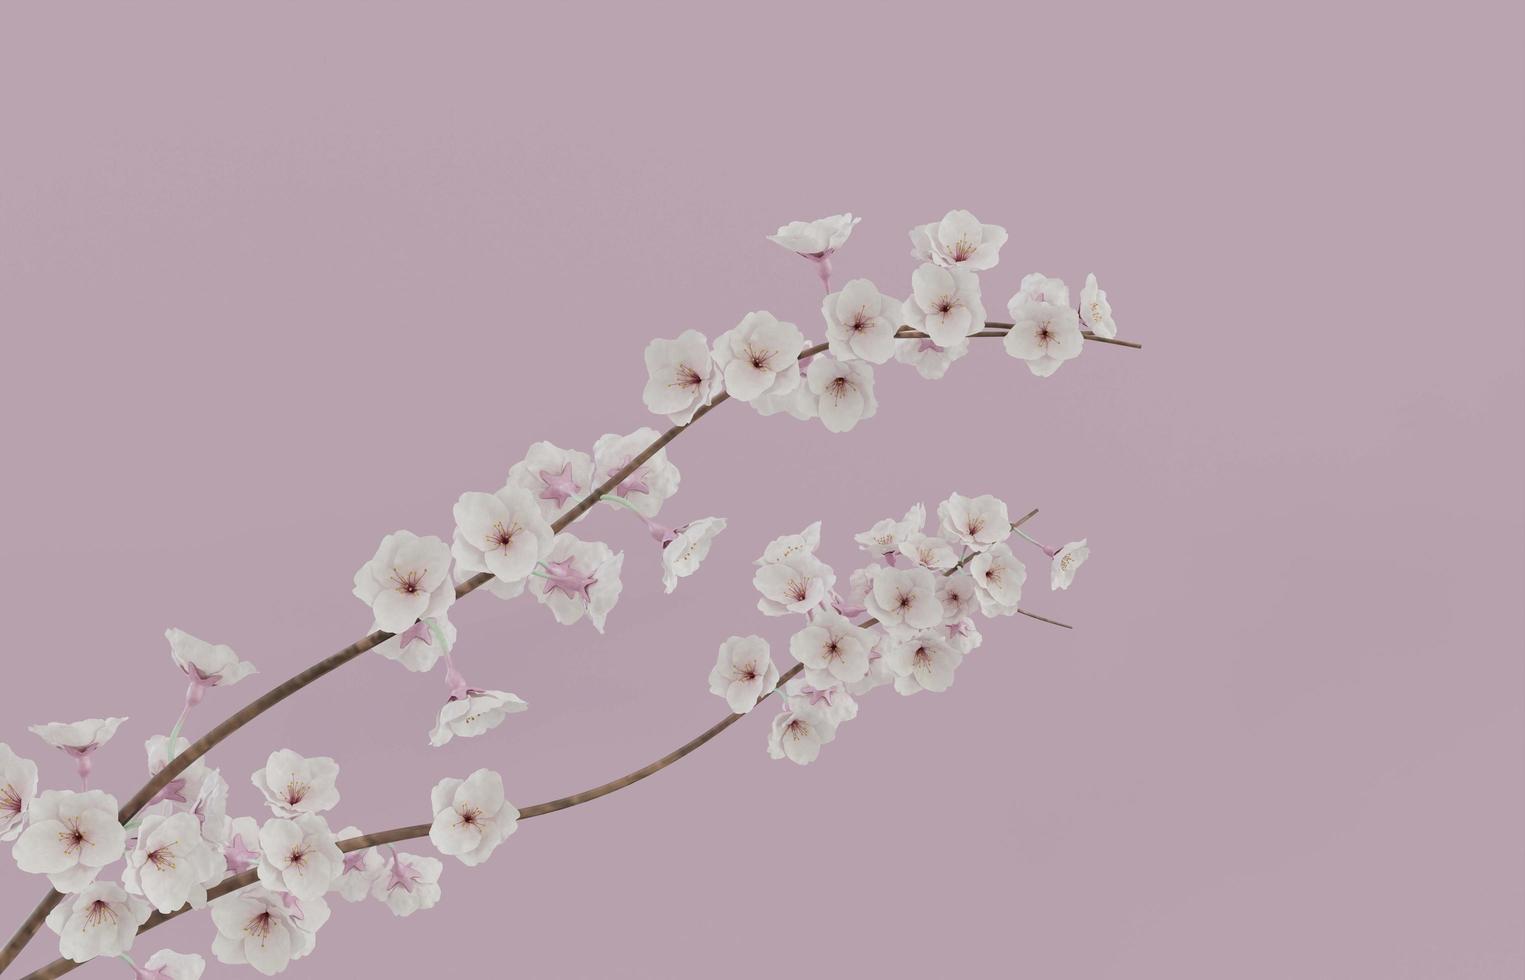 A branch of cherry blossoms on a purple background - Cherry blossom